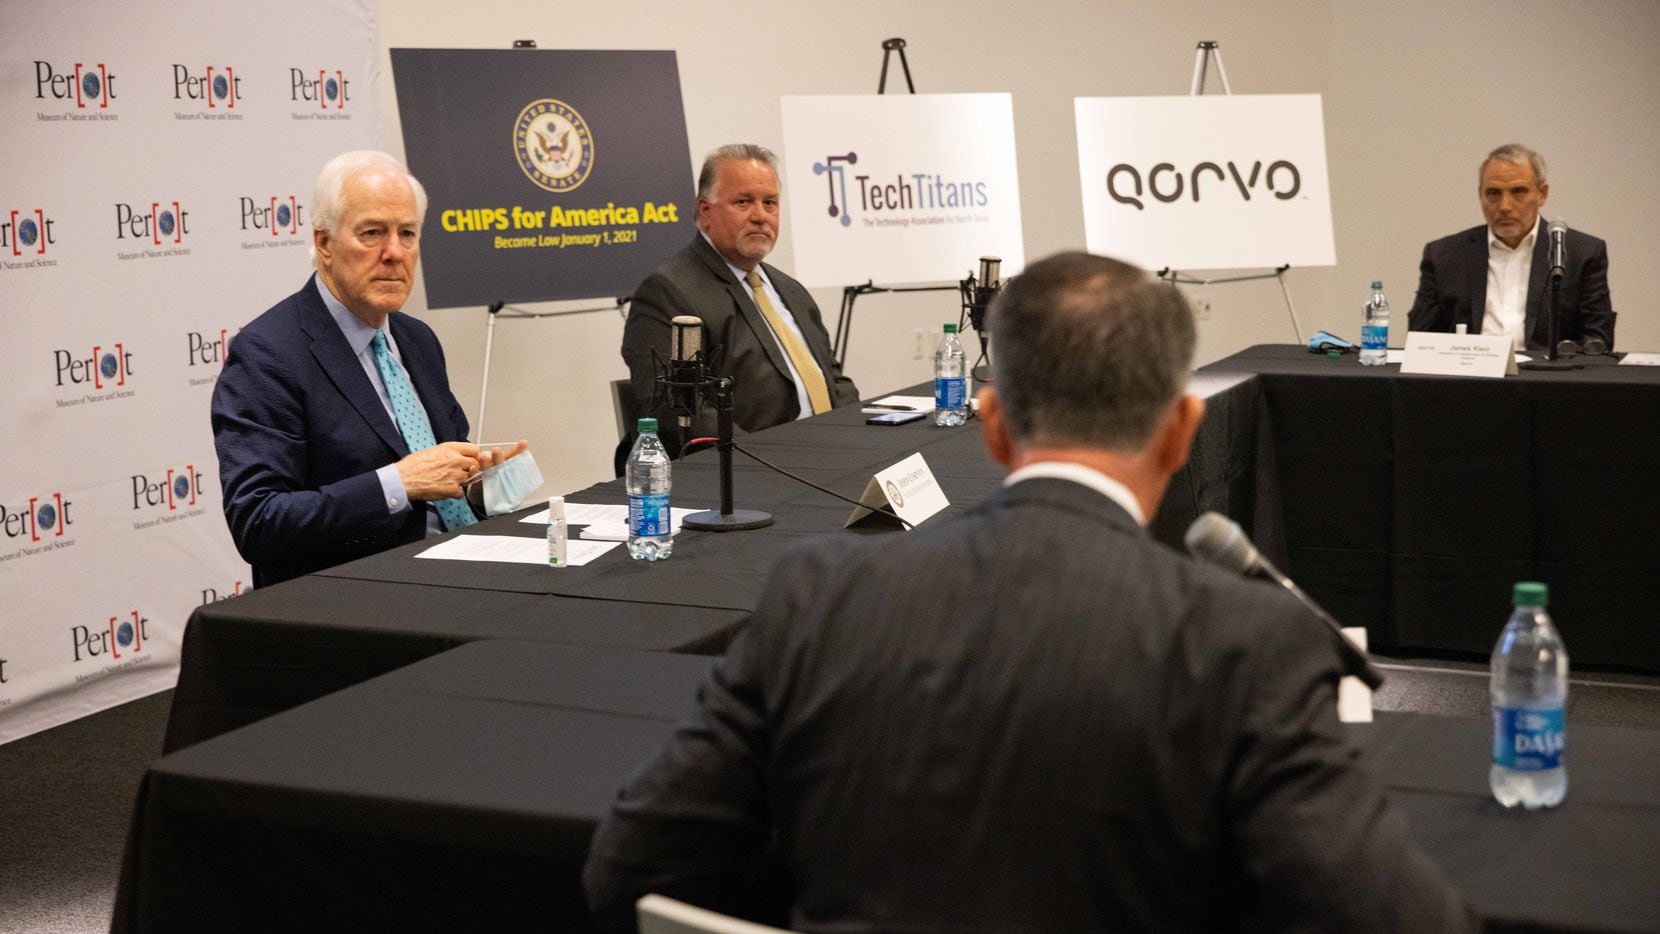 U.S. Senator John Cornyn listens during a roundtable discussing the semiconductor shortages impact on manufacturing in North Texas at the Perot Museum of Nature and Science on Thursday, May 6, 2021, in Dallas.